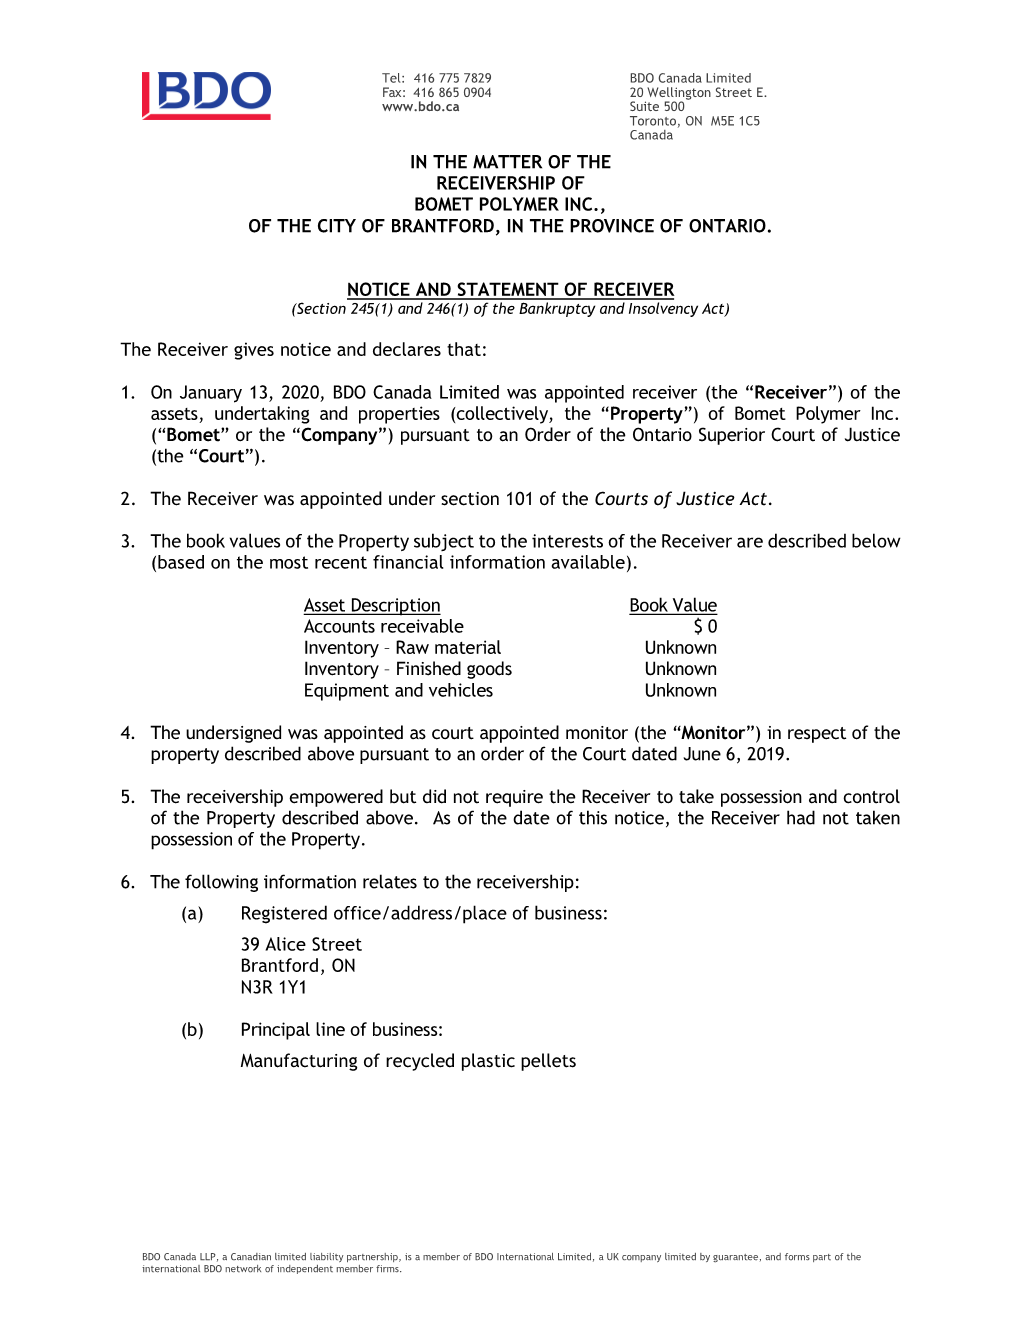 In the Matter of the Receivership of Bomet Polymer Inc., of the City of Brantford, in the Province of Ontario. Notice and Statement of Receiver